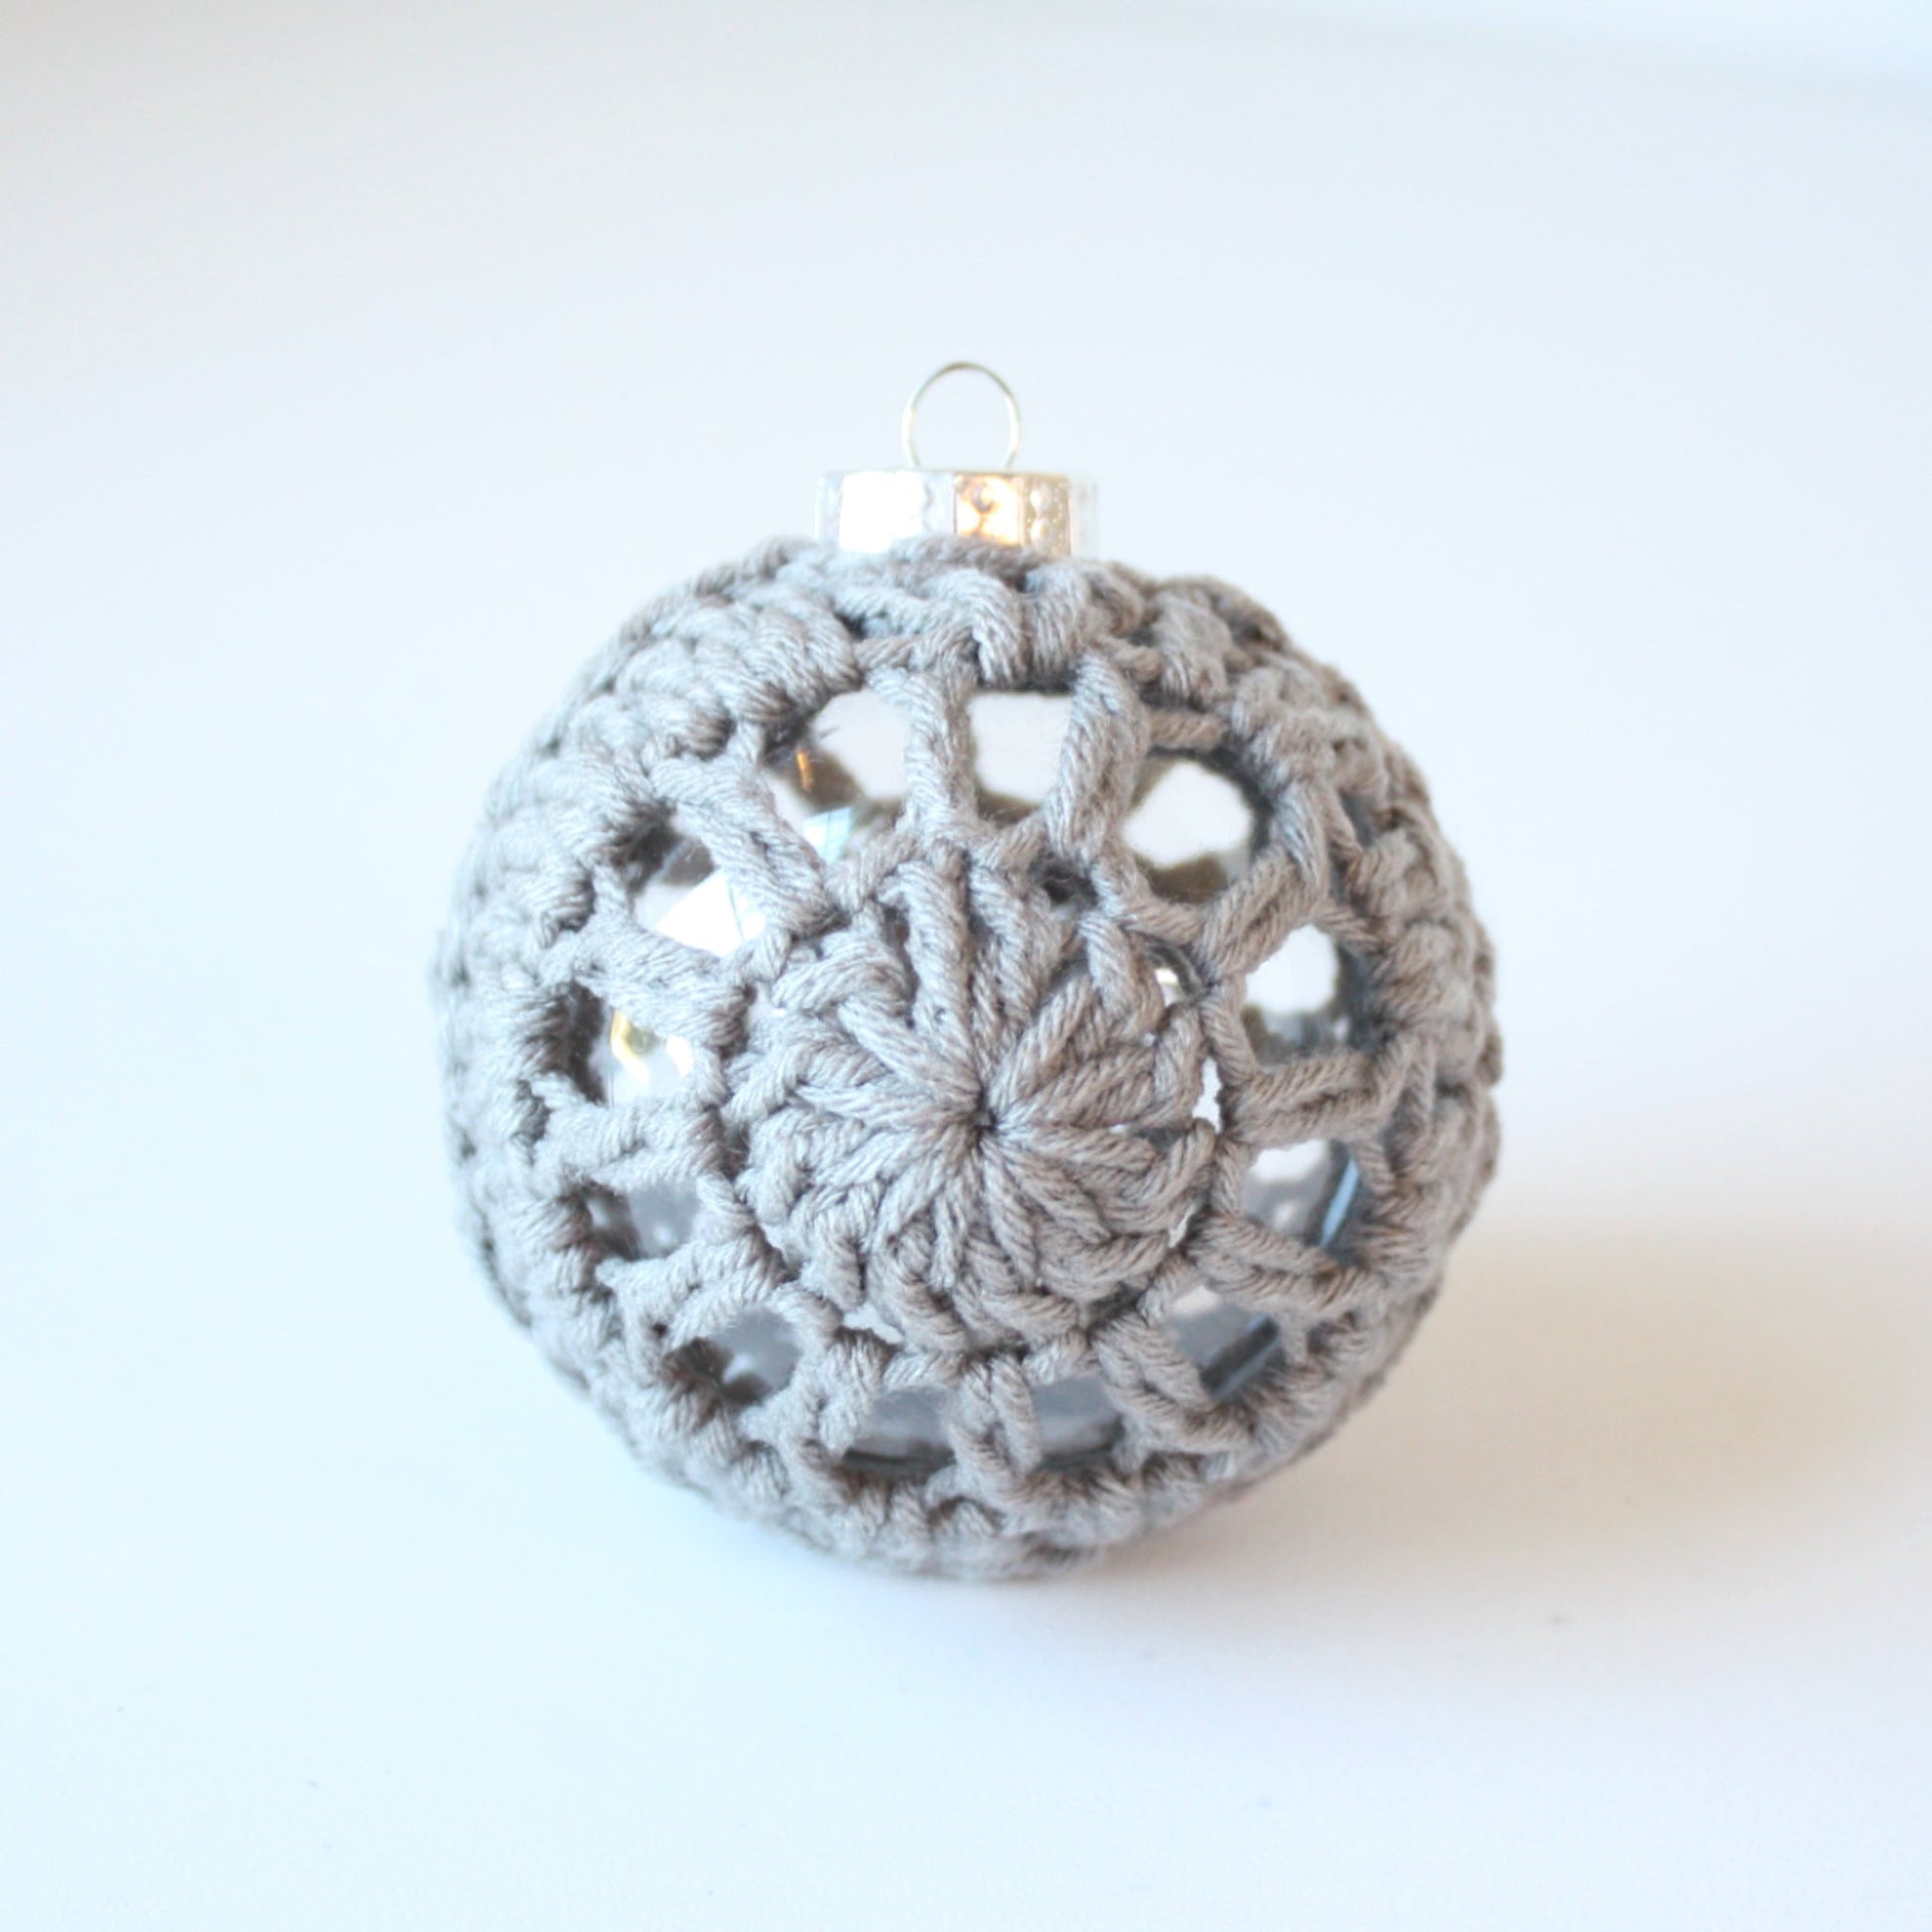 Crocheted Christmas Ornaments - Made in the USA